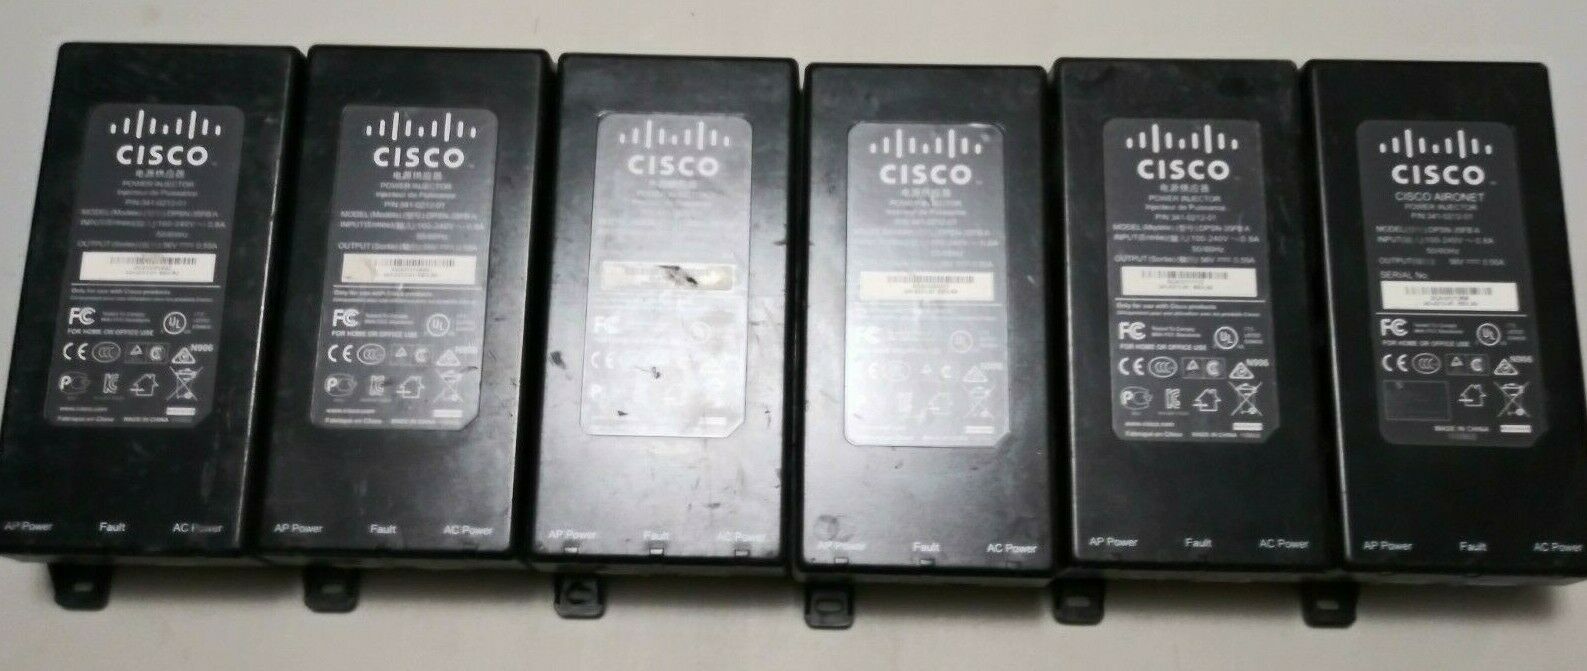 Lot of 6 Genuine Cisco Power Injector P/N 341-0212-01 DPSN-35FB A